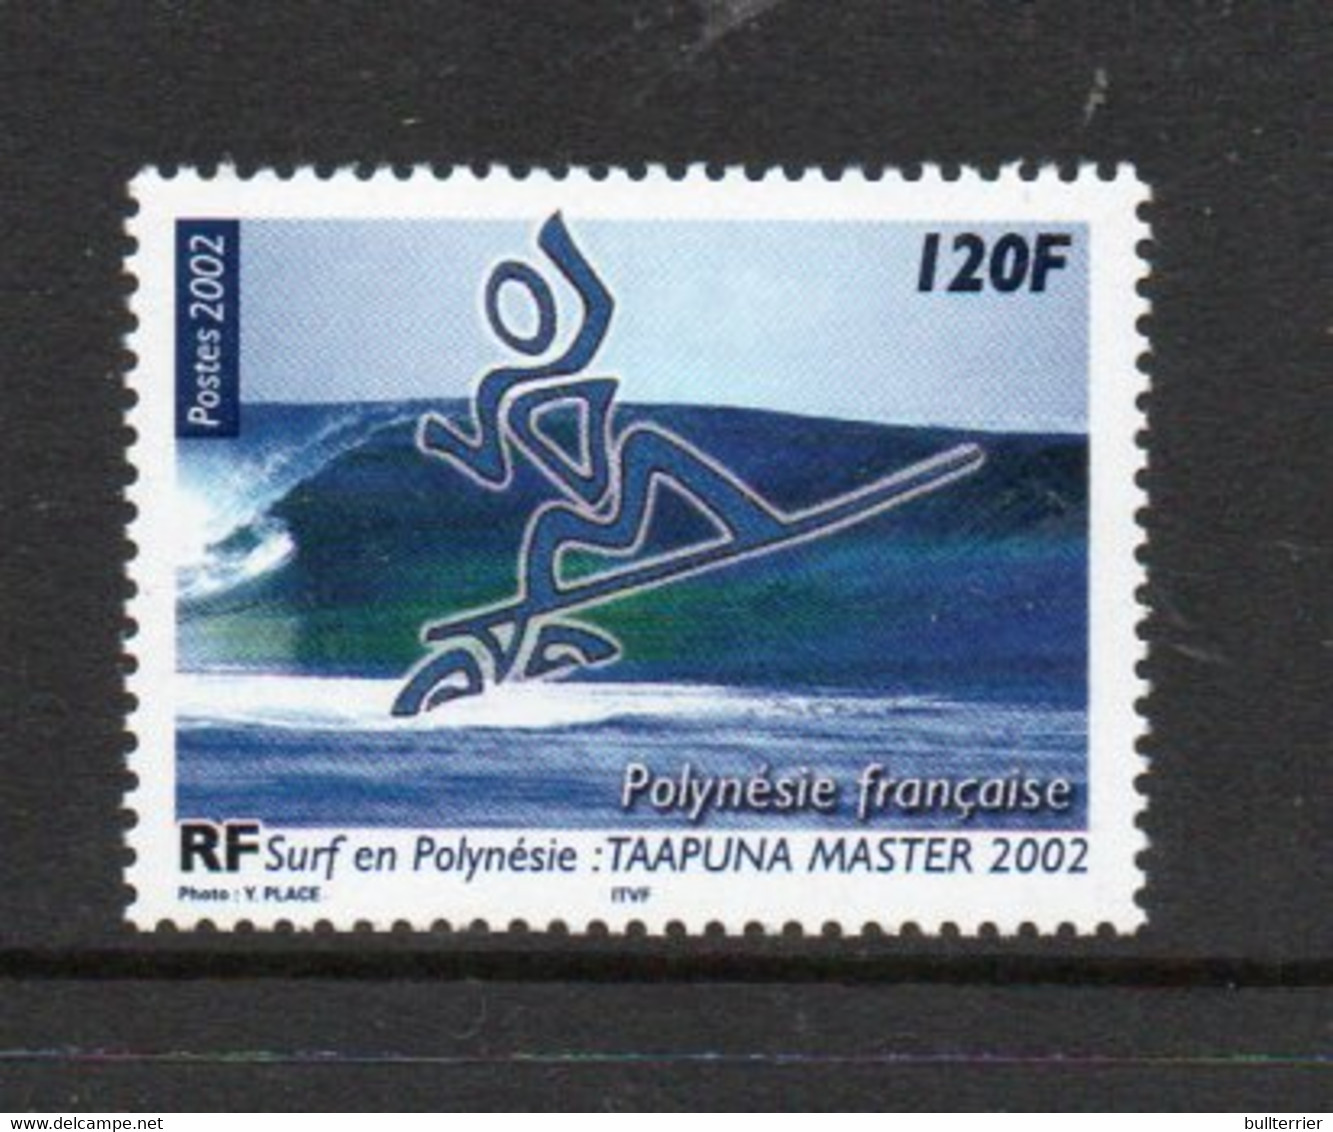 SURFING  - POLYNESIA - 2002 - SURFING  MINT NEVER HINGED - Sci Nautico